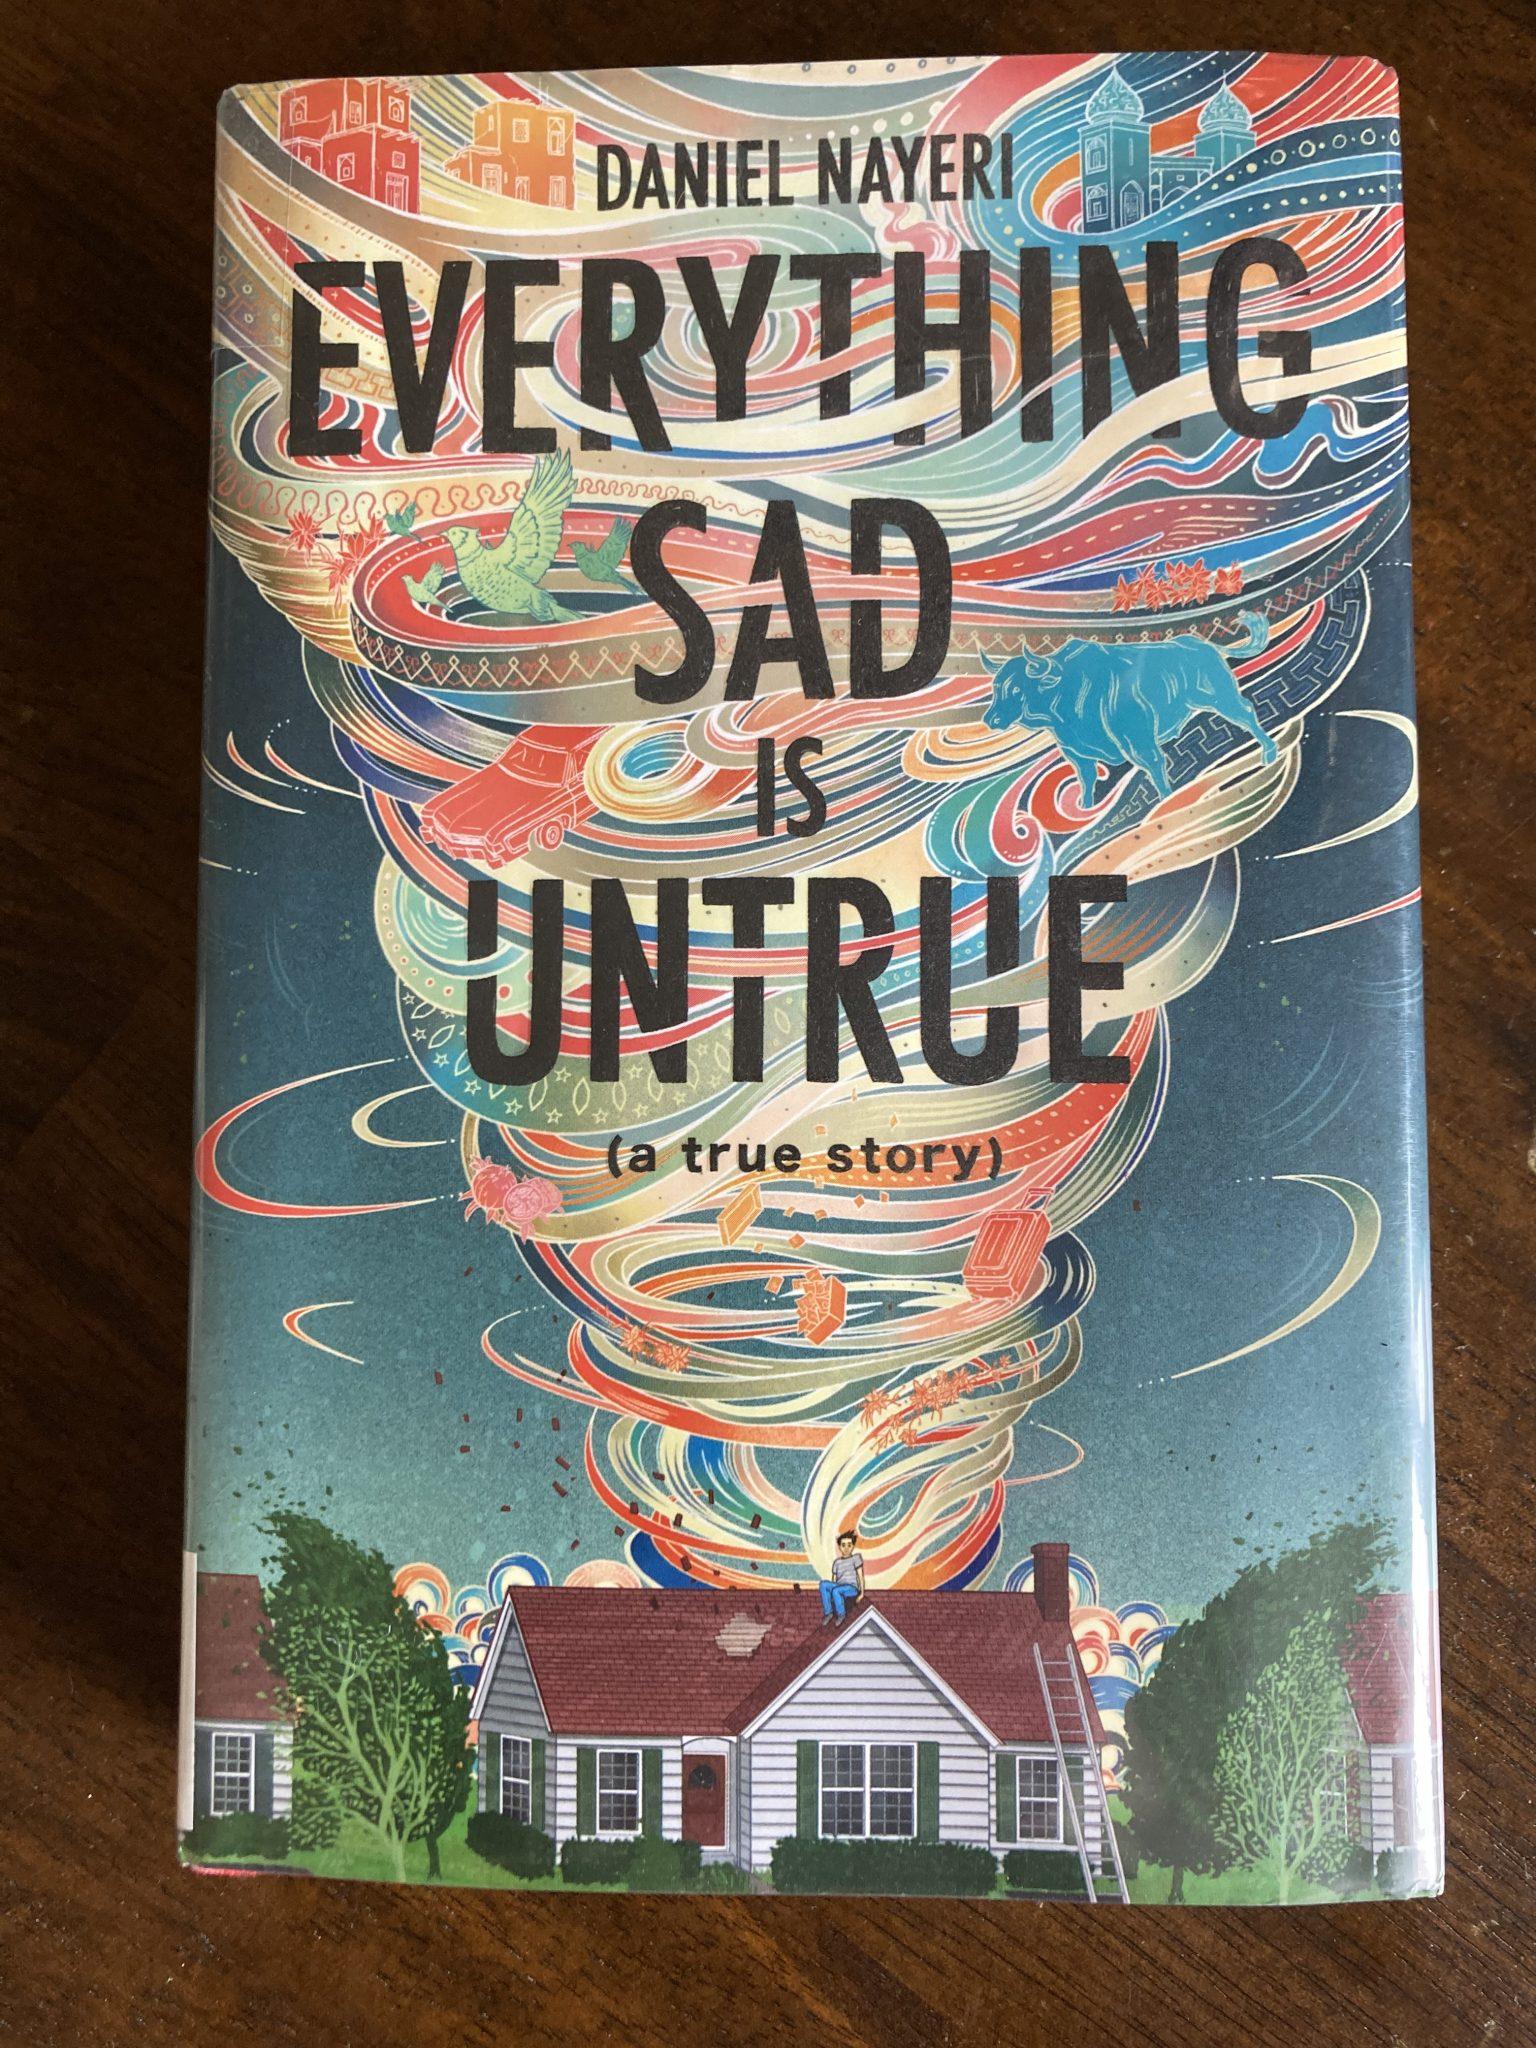 Book Cover: Everything Sad is Untrue